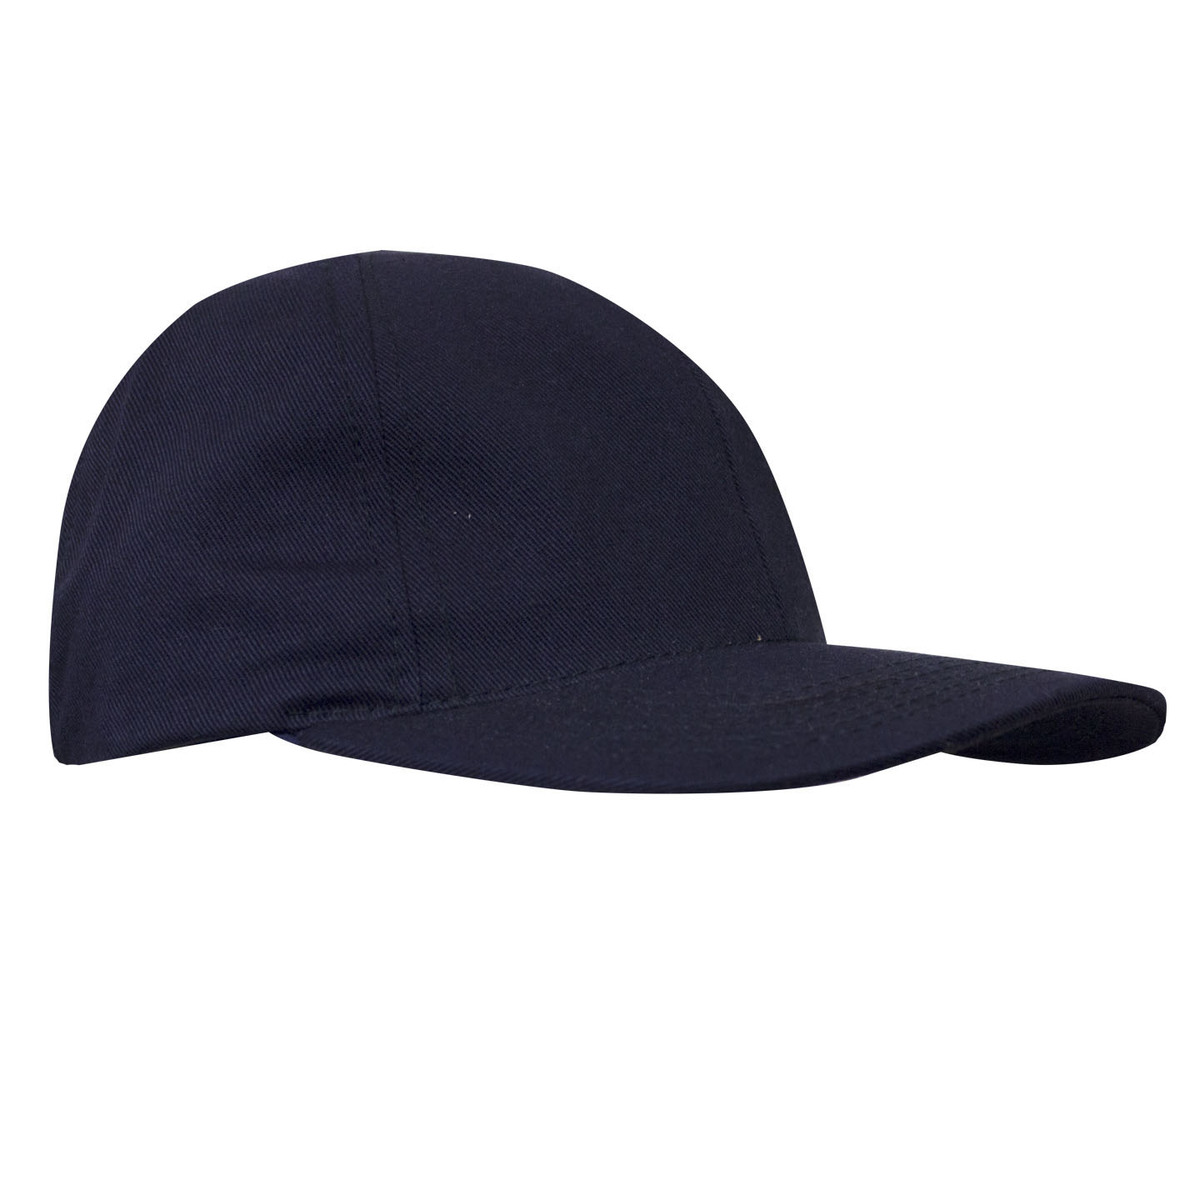 National Safety Apparel Navy Westex UltraSoft® Flame Resistant Baseball Cap With Hook And Loop Closure And Adjustable Fit